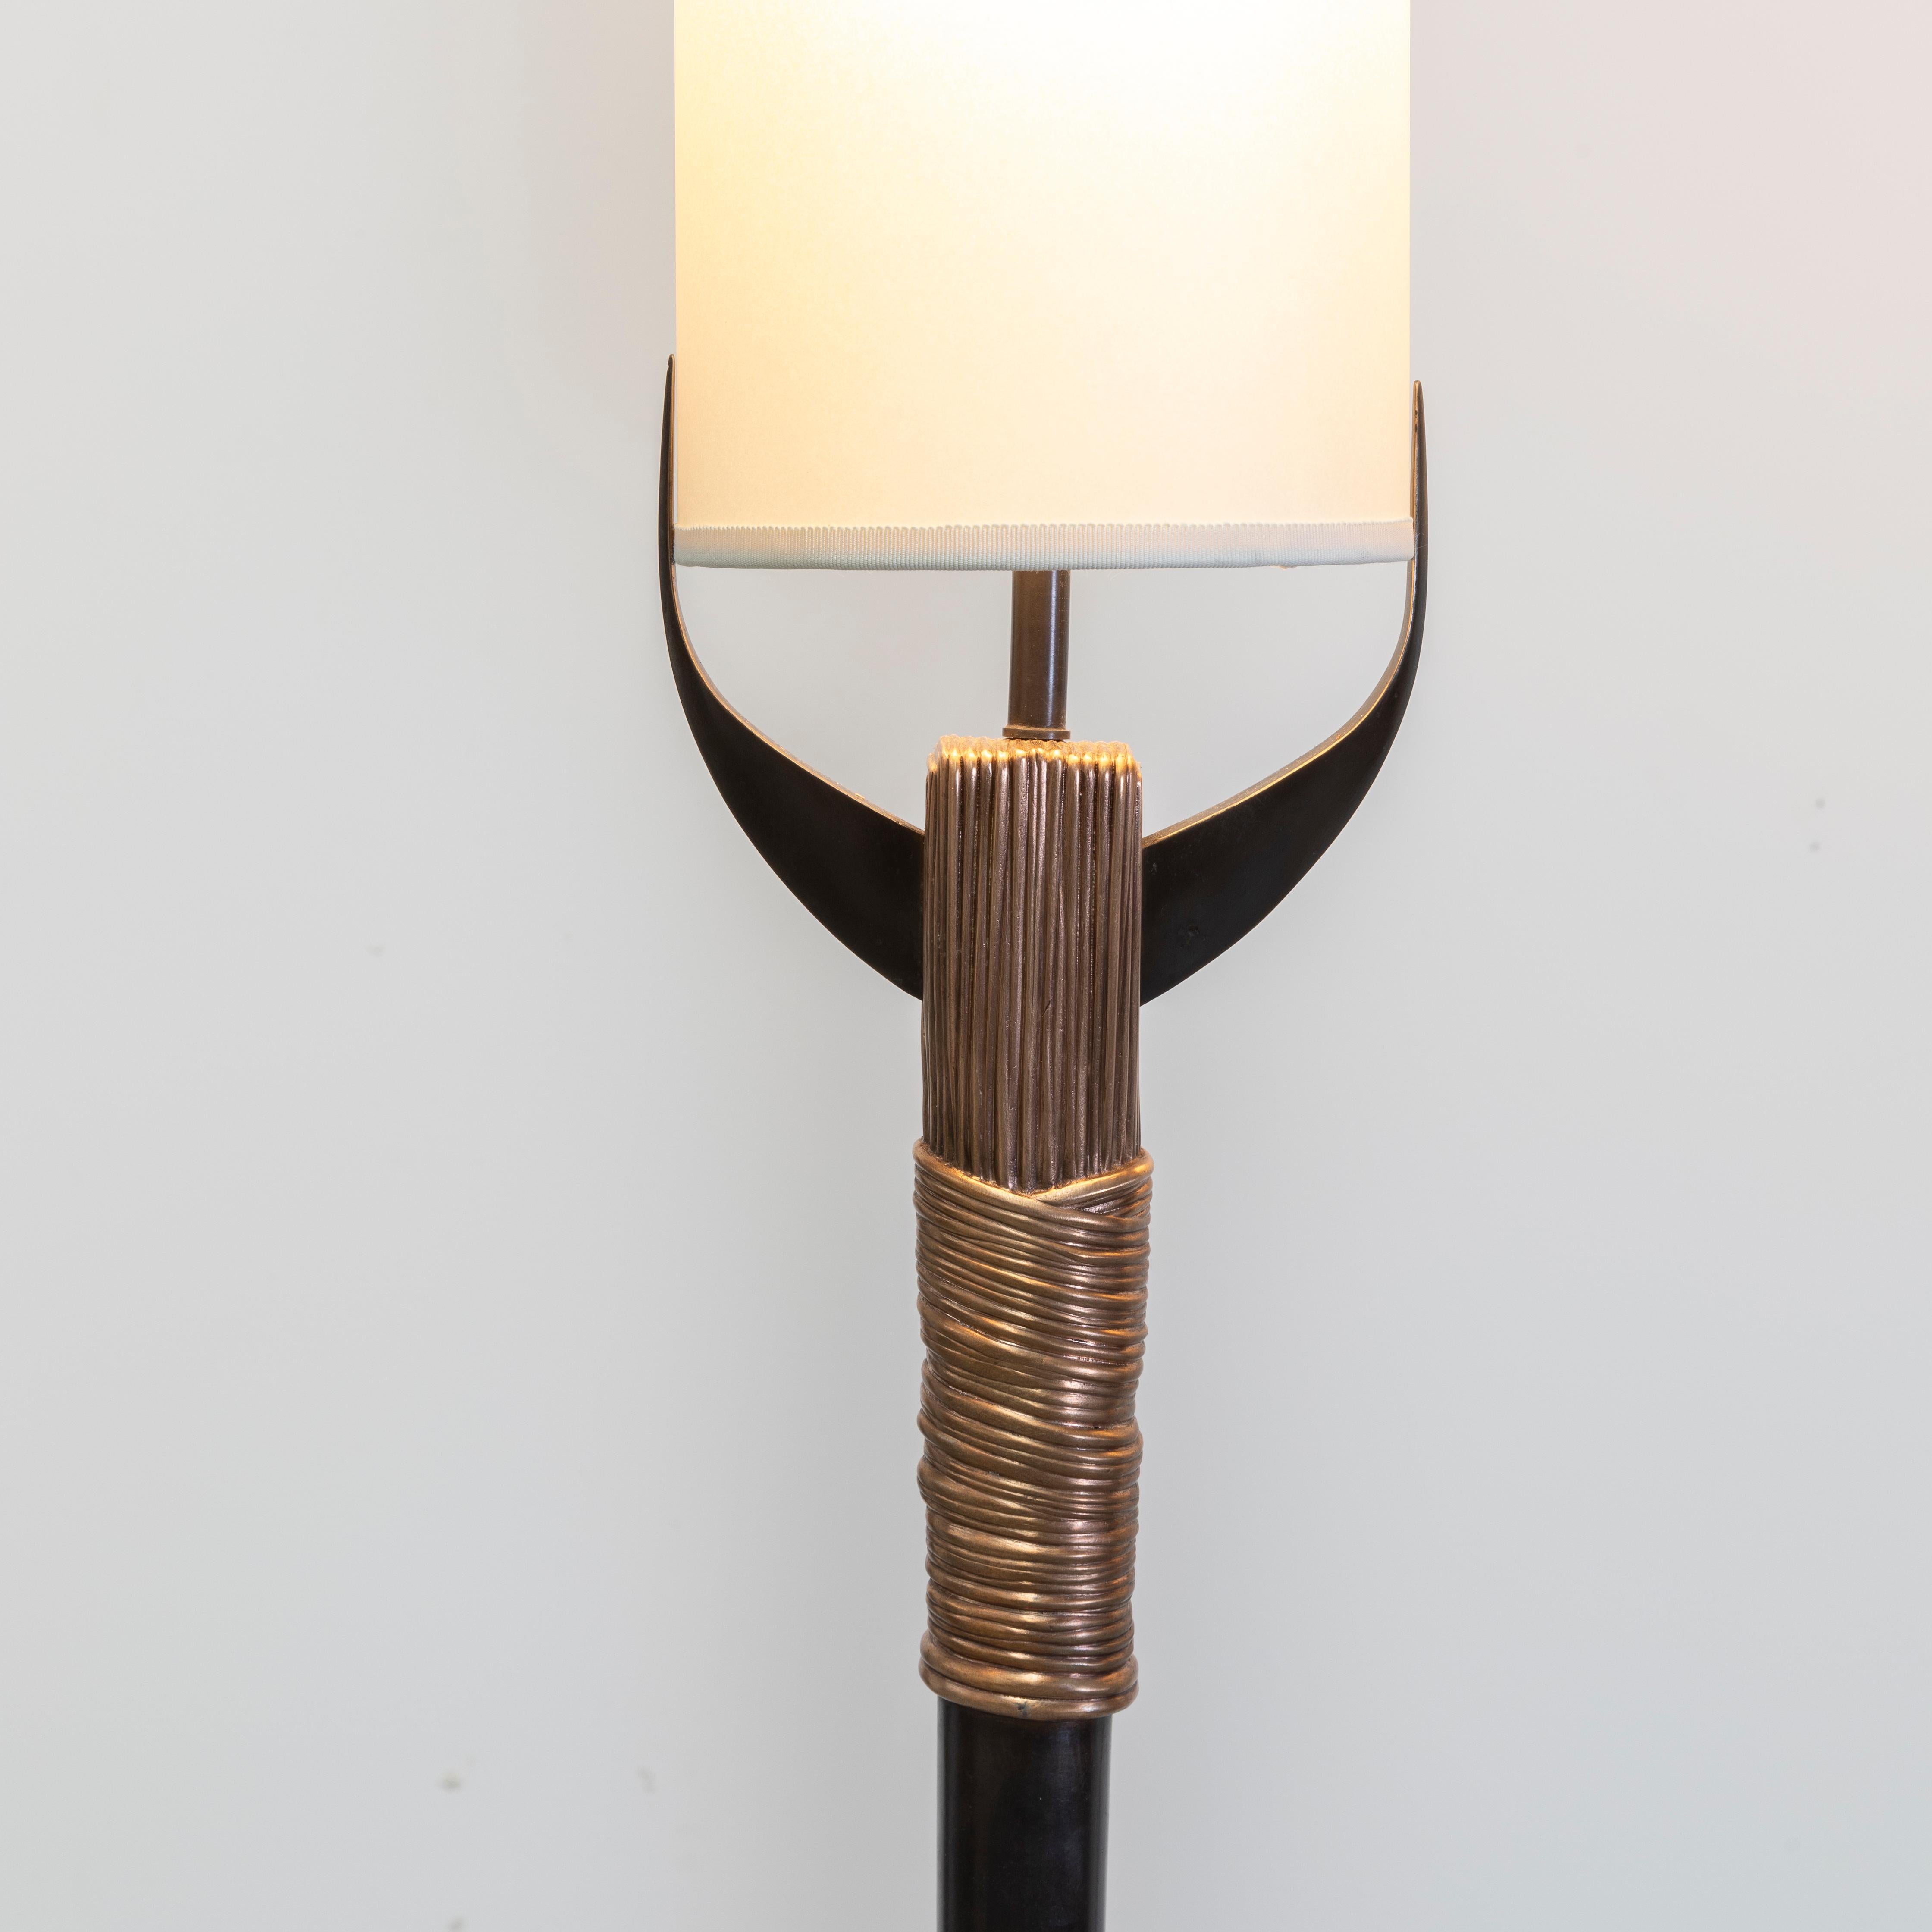 Floor lamp in bronze with textured details. The texture is nothing ordinary. Each element of a sprig wheat ear was made into a mold, carefully arranged and then cast in bronze 

Bronze floor lamps with plant inspired details. Elegant and timeless.